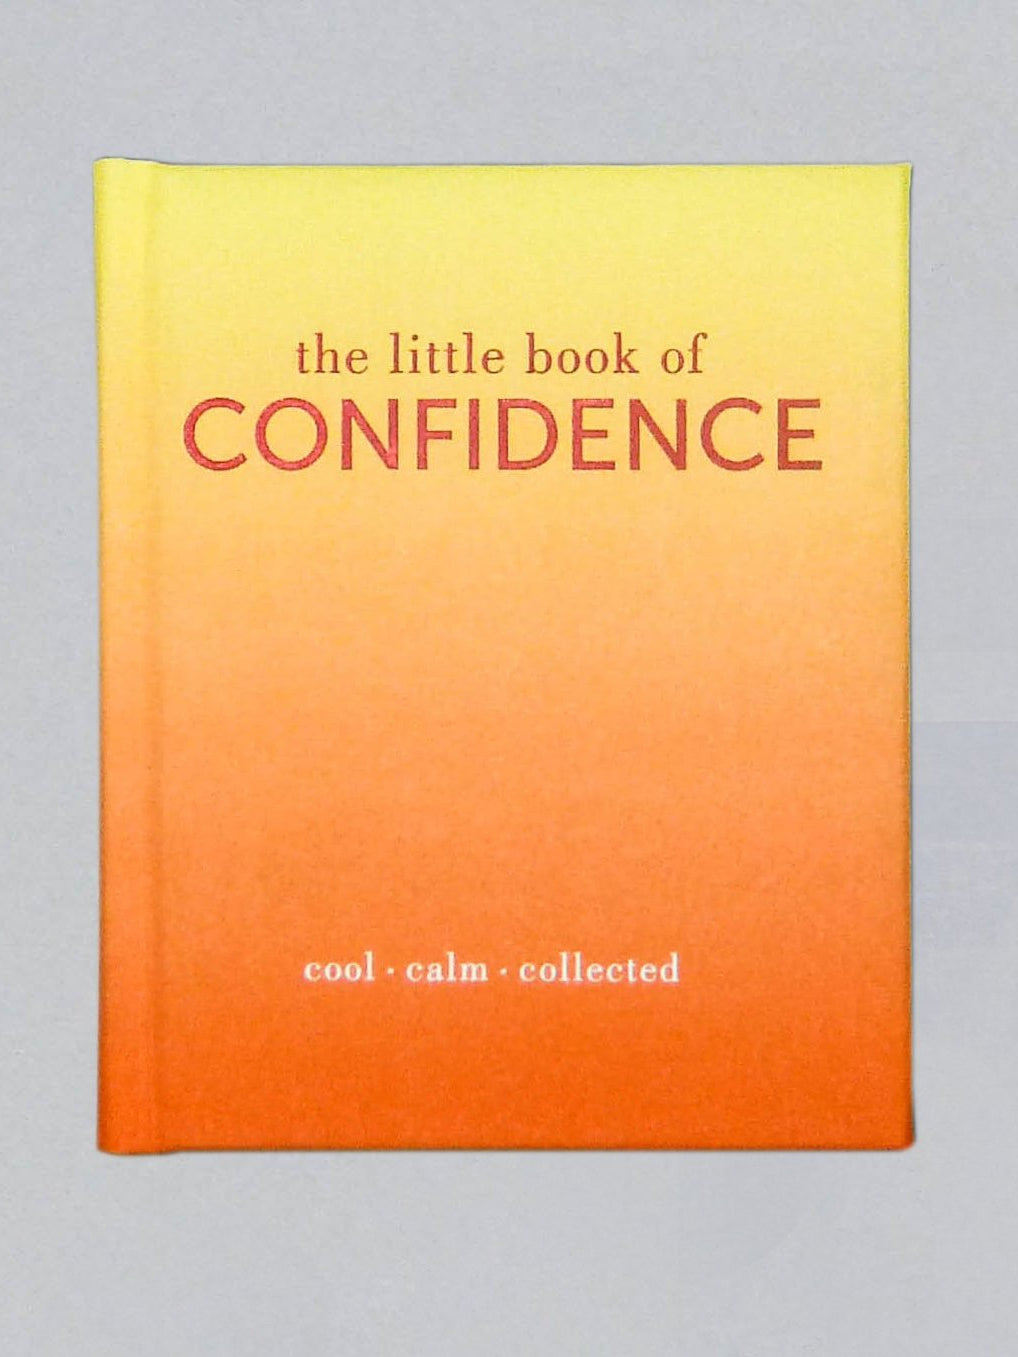 The LIttle Book of Confidence